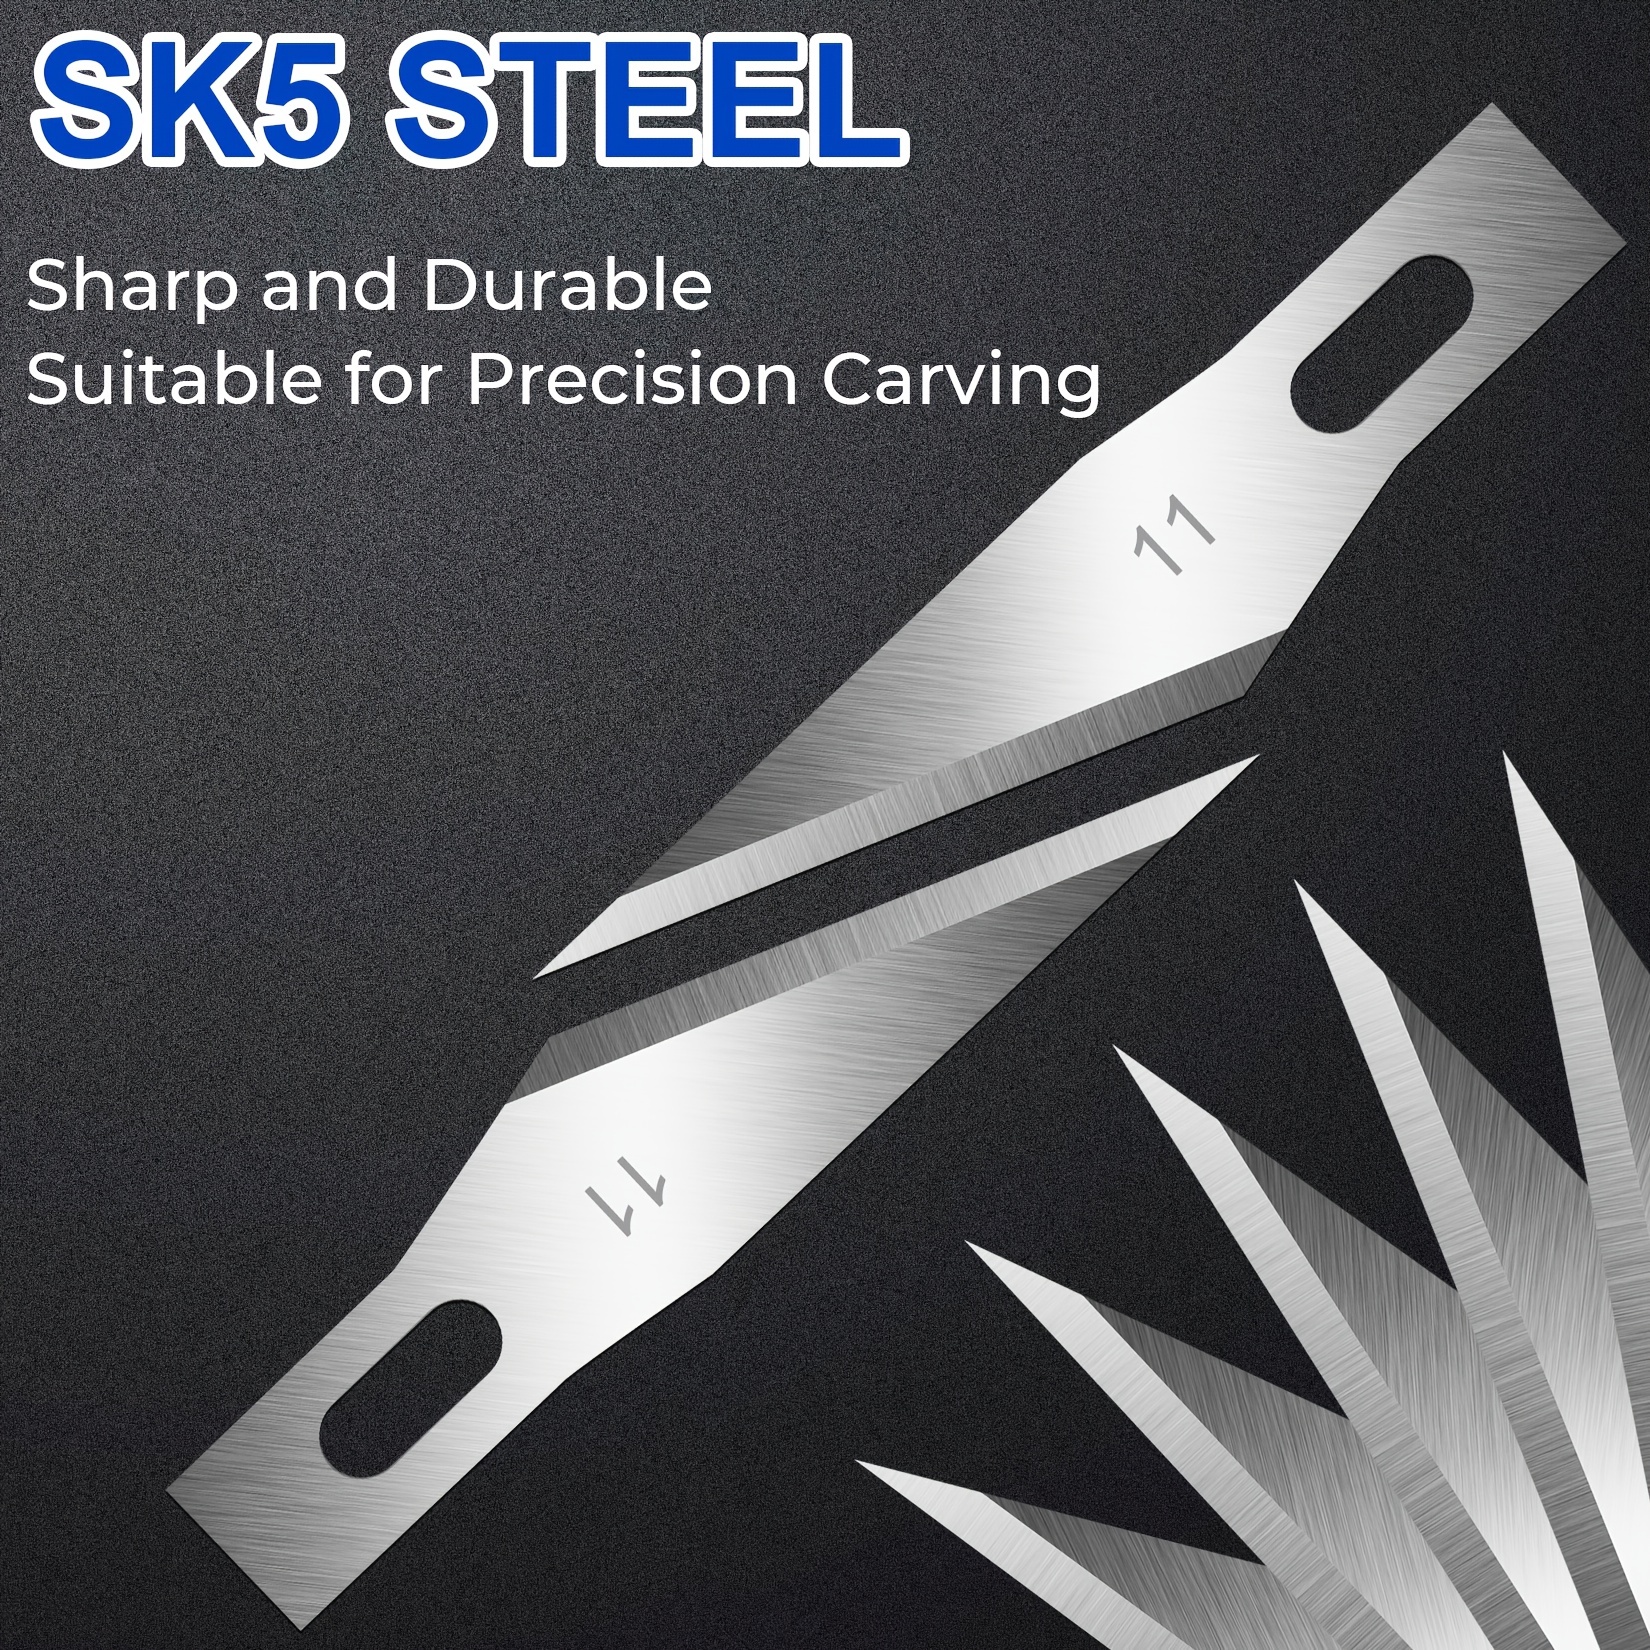 150 PCS Exacto Knife Blades 11, Sharp Hobby Knife Blades, High Carbon Steel  Craft Knife Blades, #11 Hobby Knife Replacement Blades, Exacto Blades For